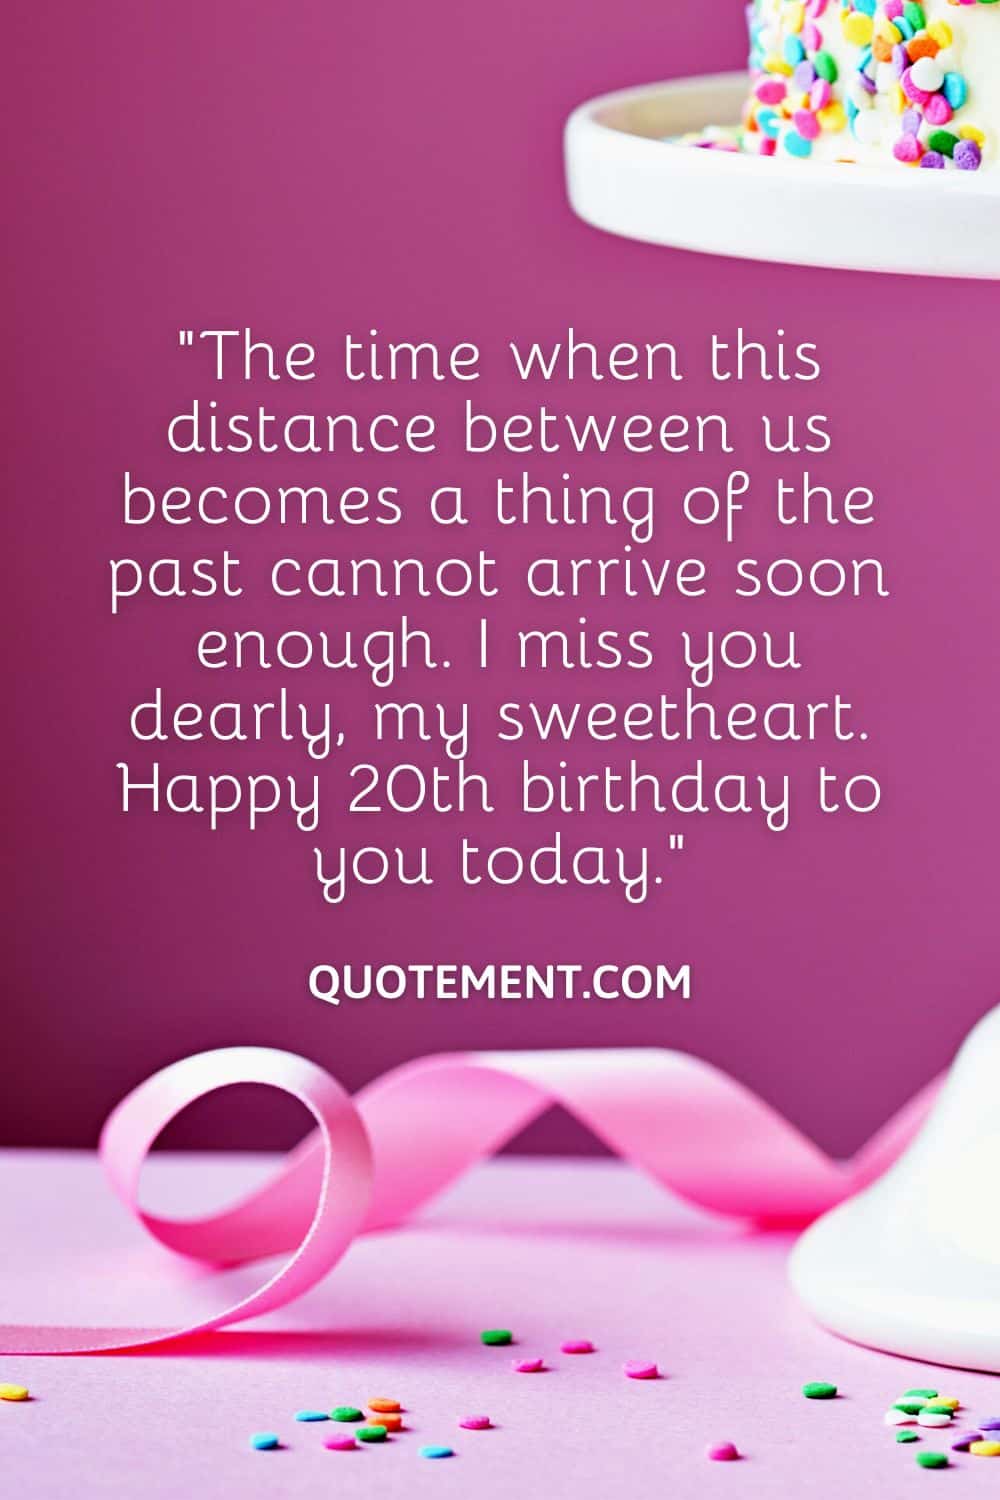 The time when this distance between us becomes a thing of the past cannot arrive soon enough